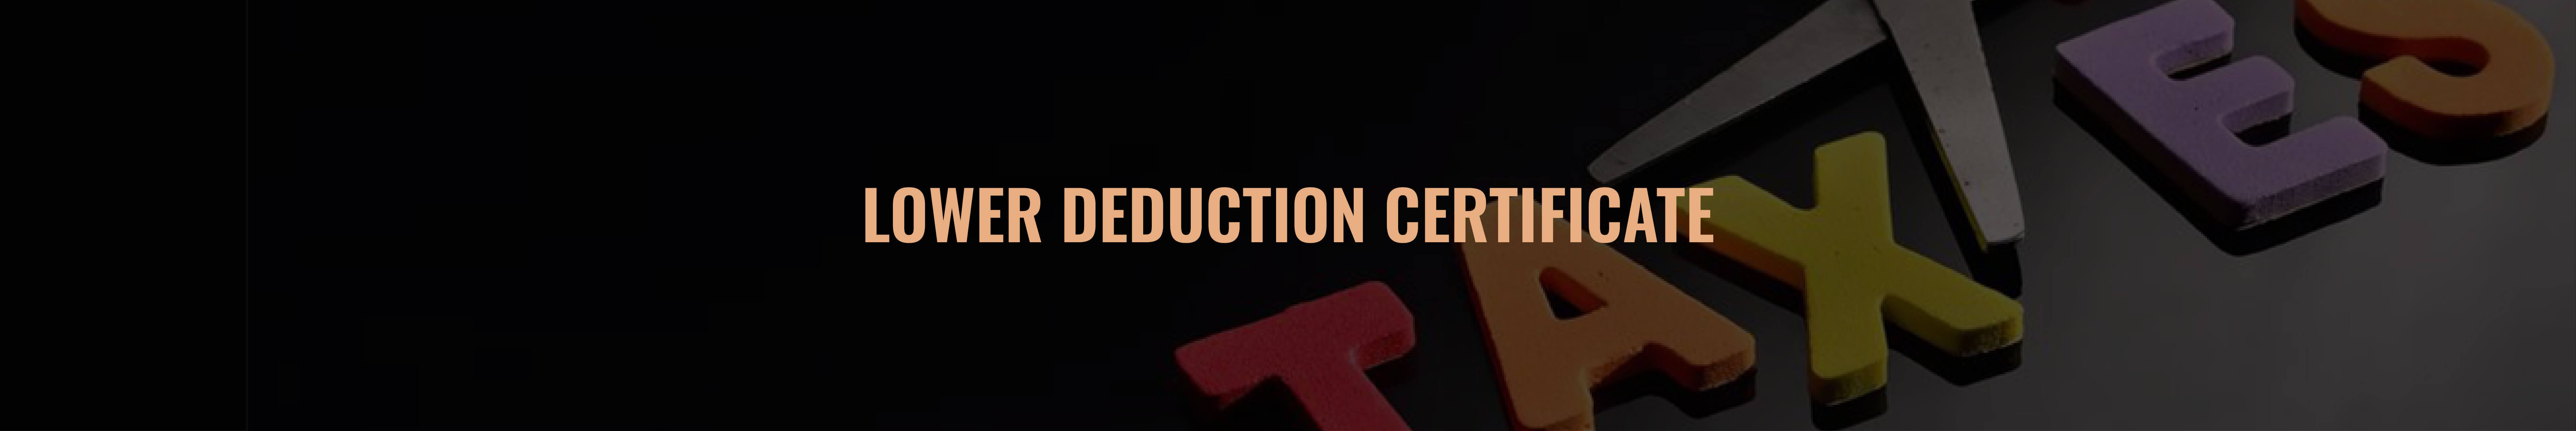 Lower Deduction Certificate